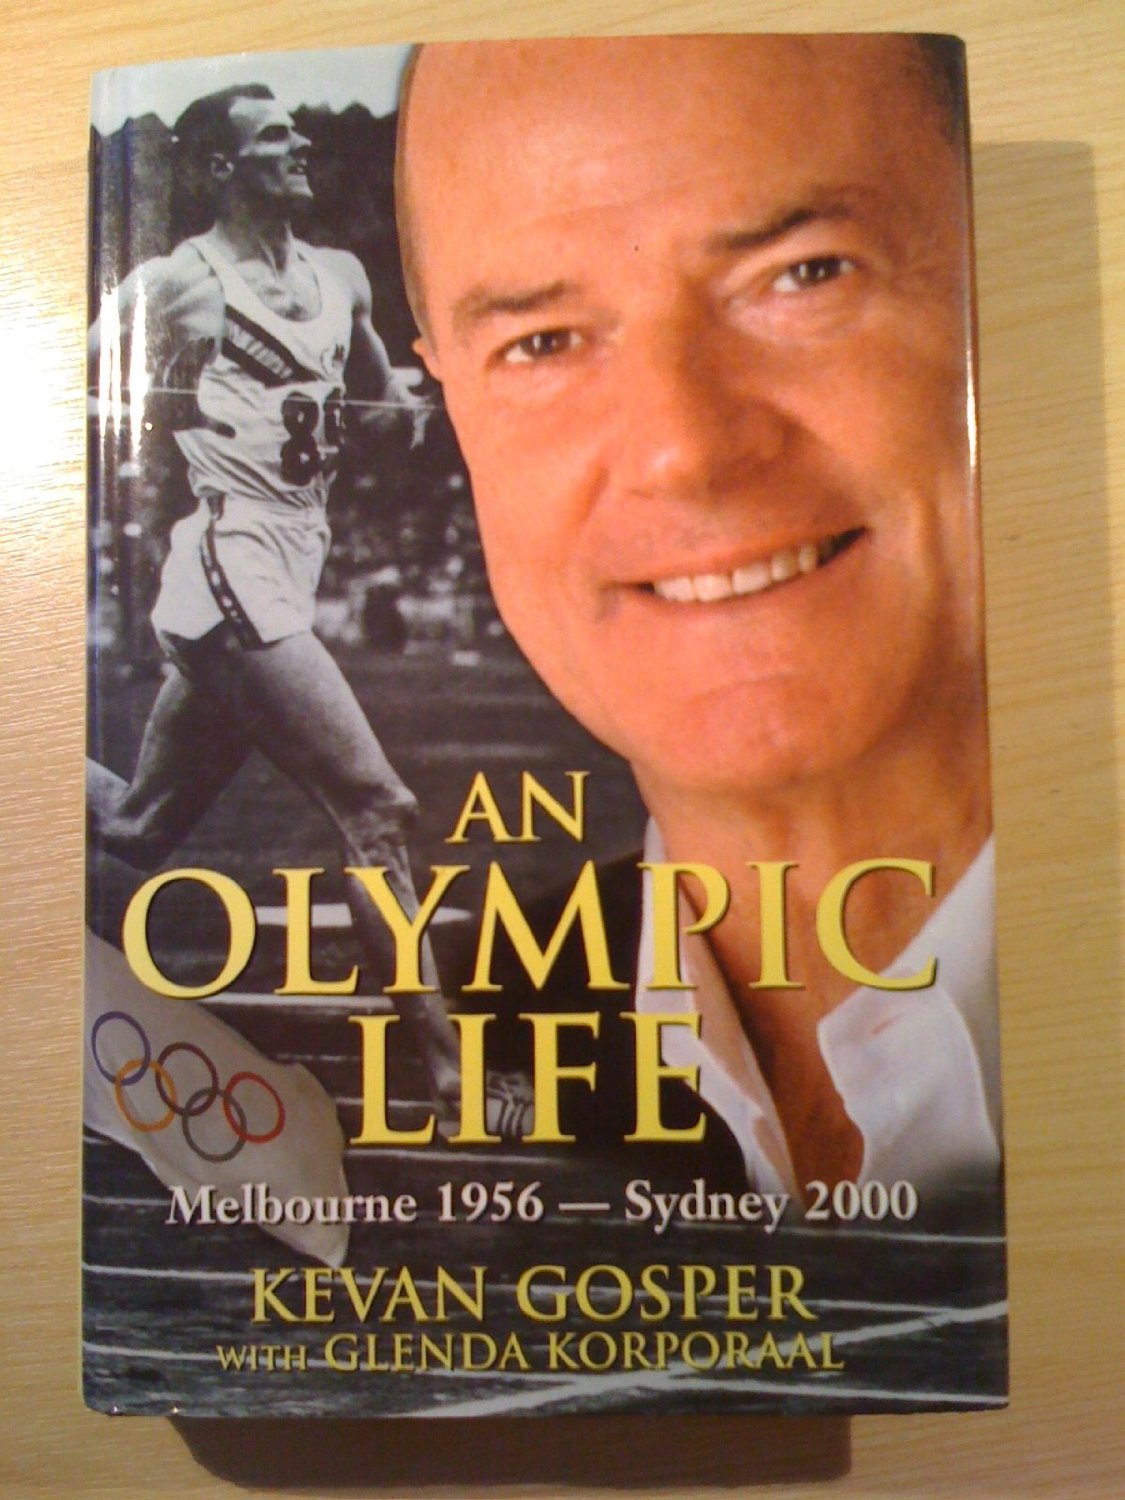 Kevan Gosper did not think Australia should have attended the 1980 Olympics in Moscow after the Soviet Union invasion of Afghanistan but admits in his autobiography - An Olympic Life - that he was wrong ©Amazon